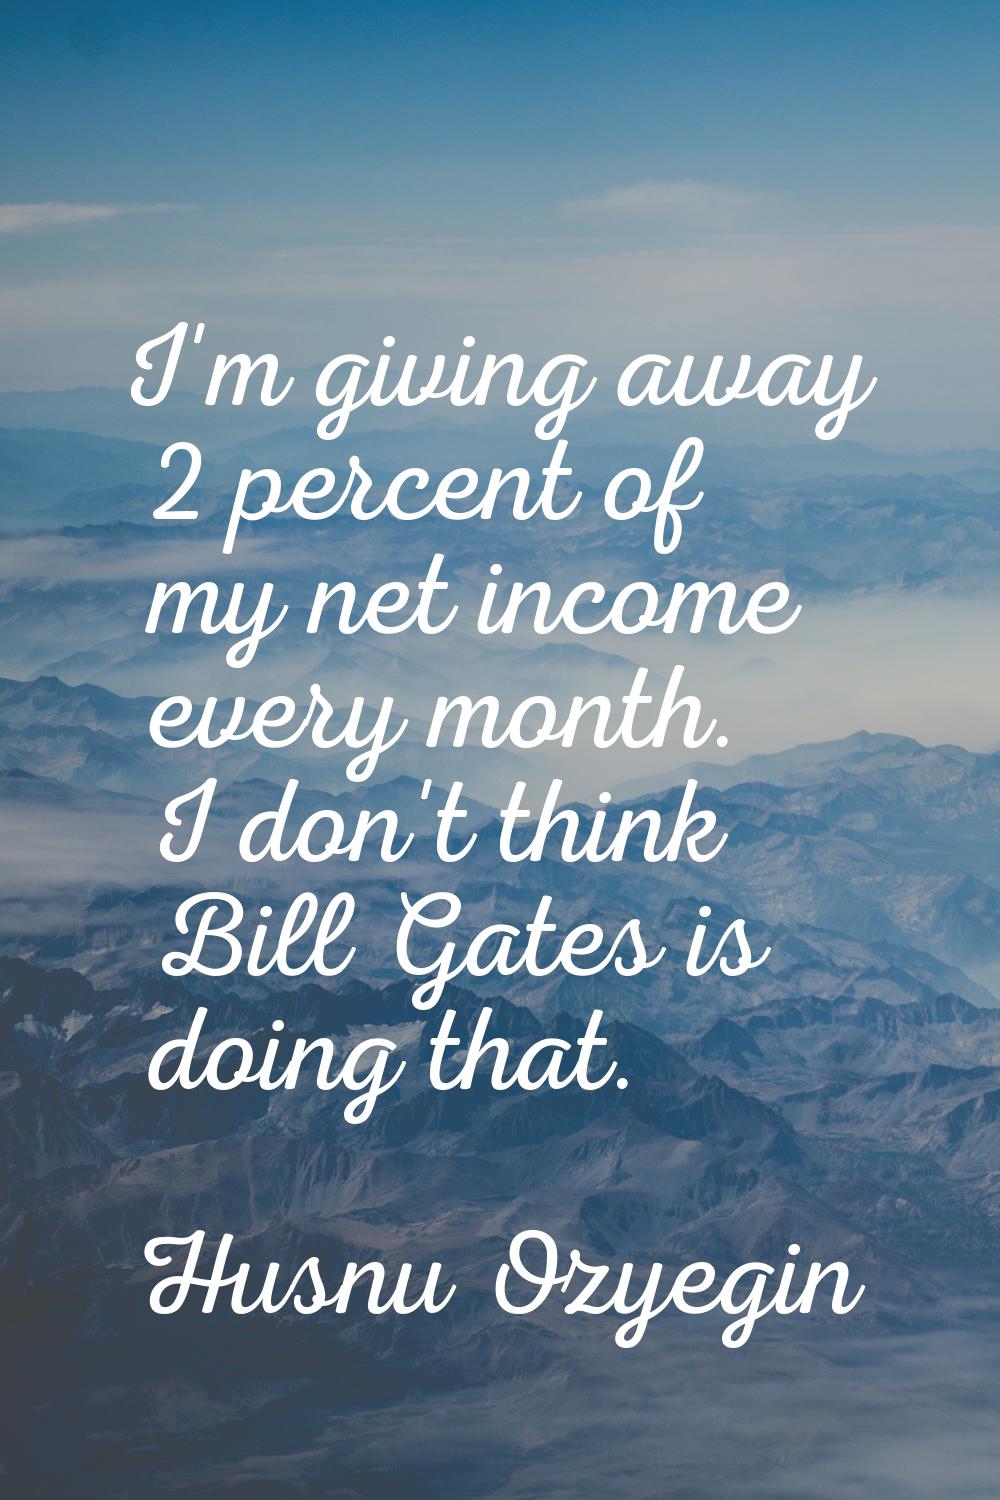 I'm giving away 2 percent of my net income every month. I don't think Bill Gates is doing that.